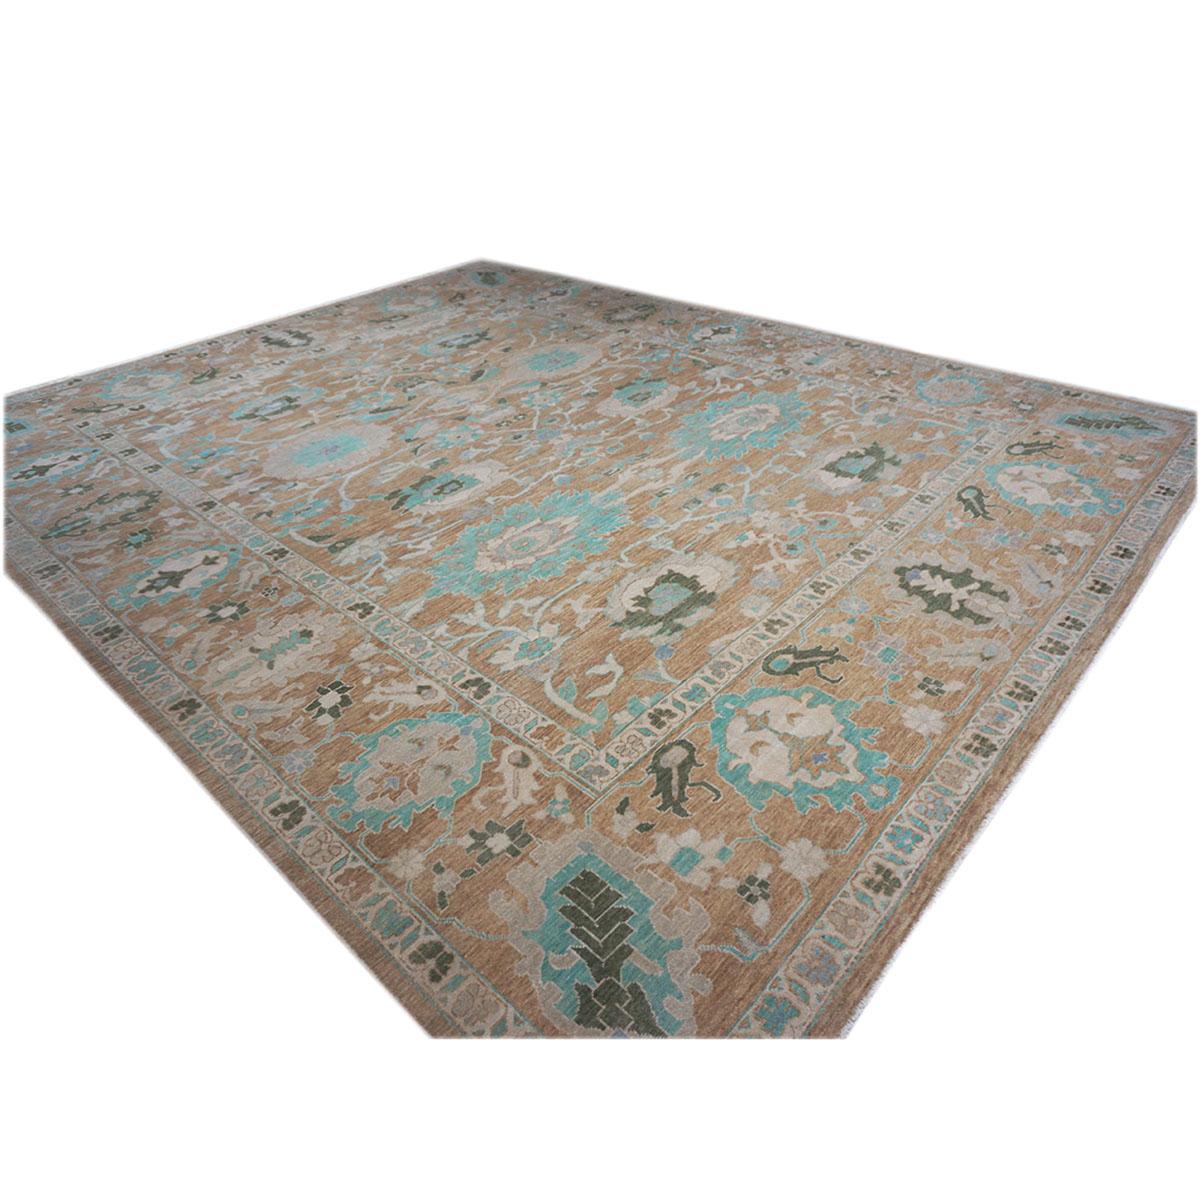 Contemporary 21st Century Sultanabad 12x15 Brown & Turquoise Handmade Area Rug For Sale